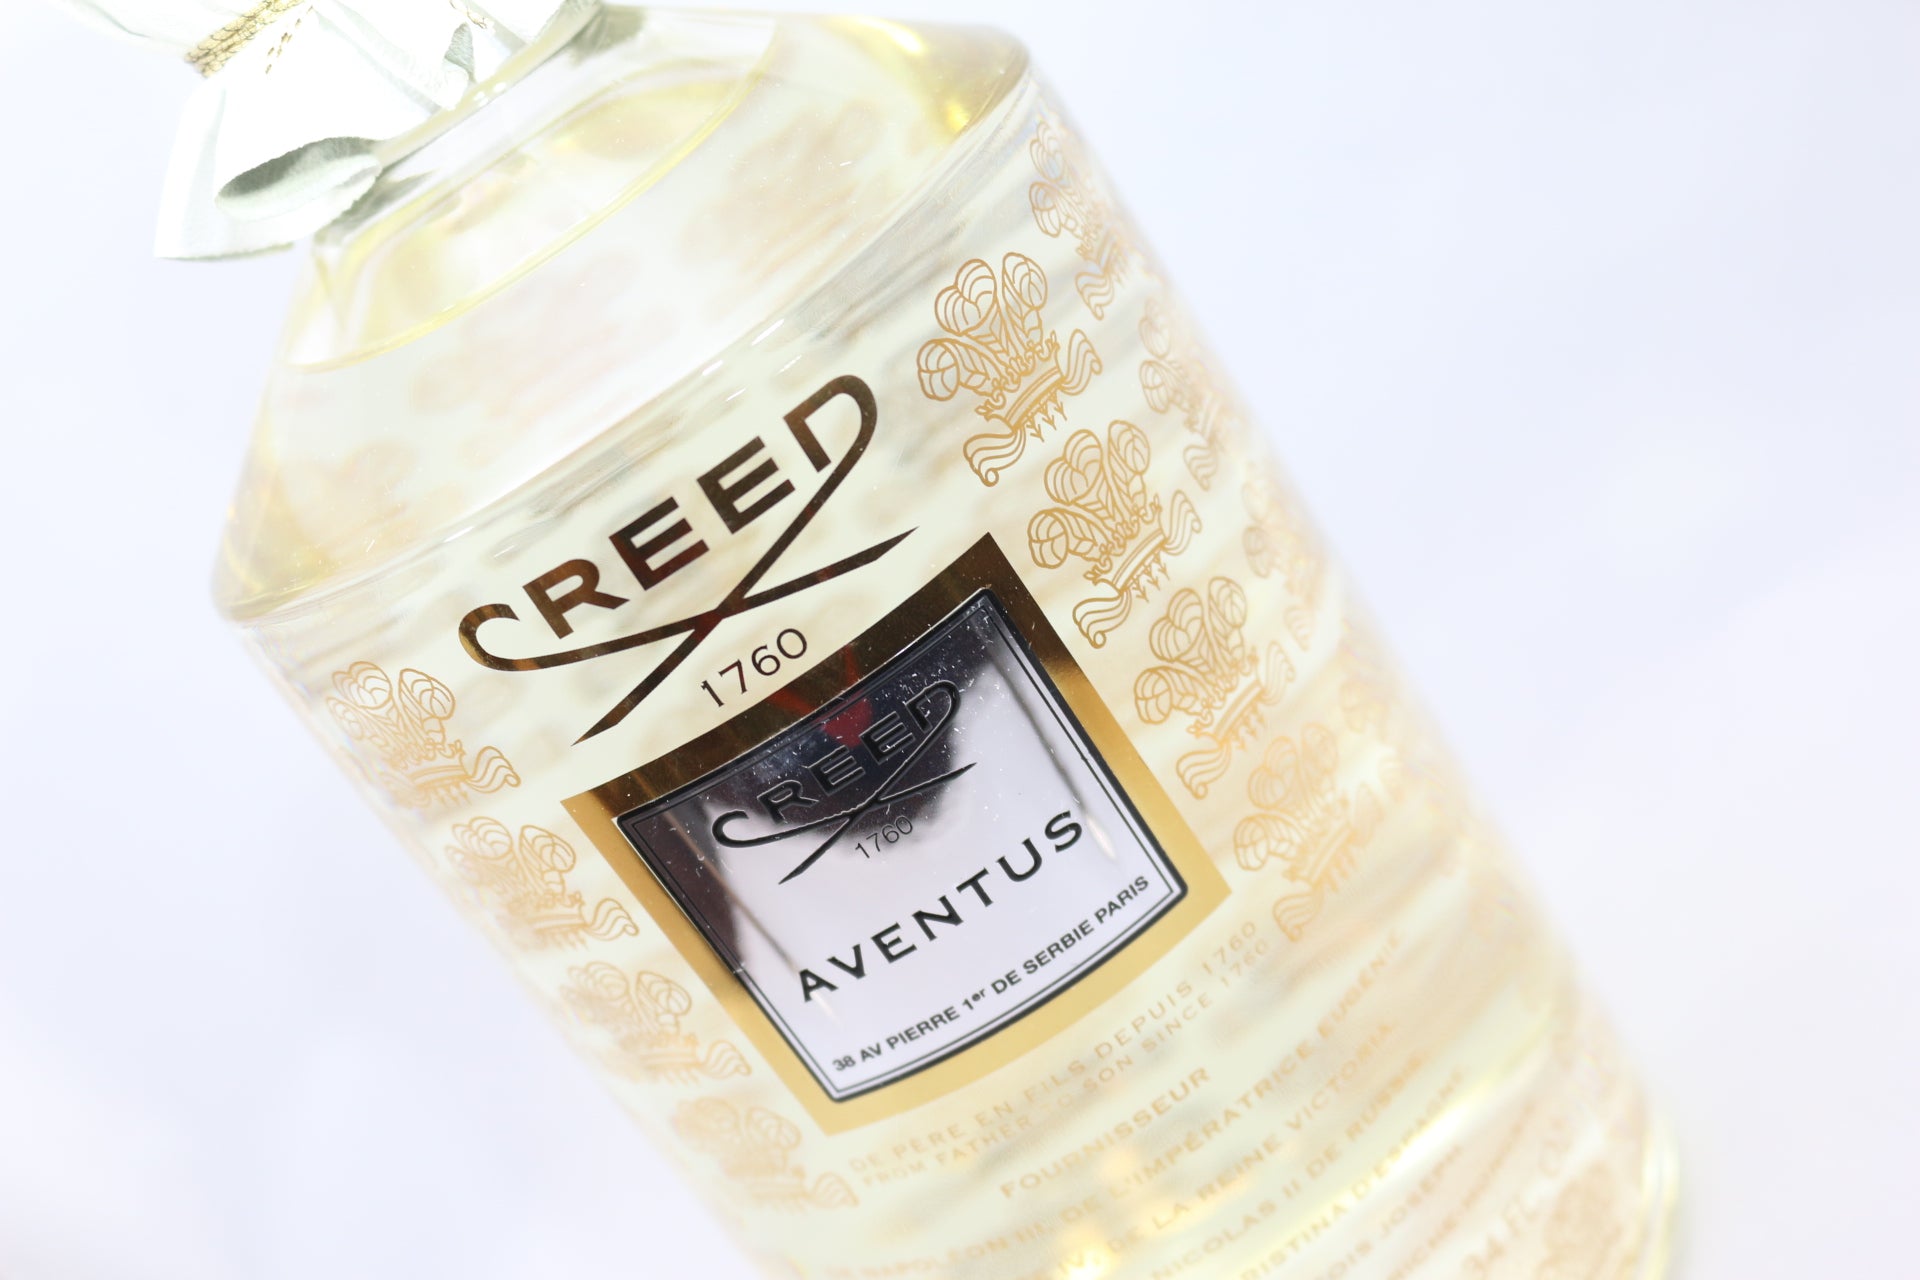 M1 - PICNTELL's Impression of Aventus by Creed For Men – picntell